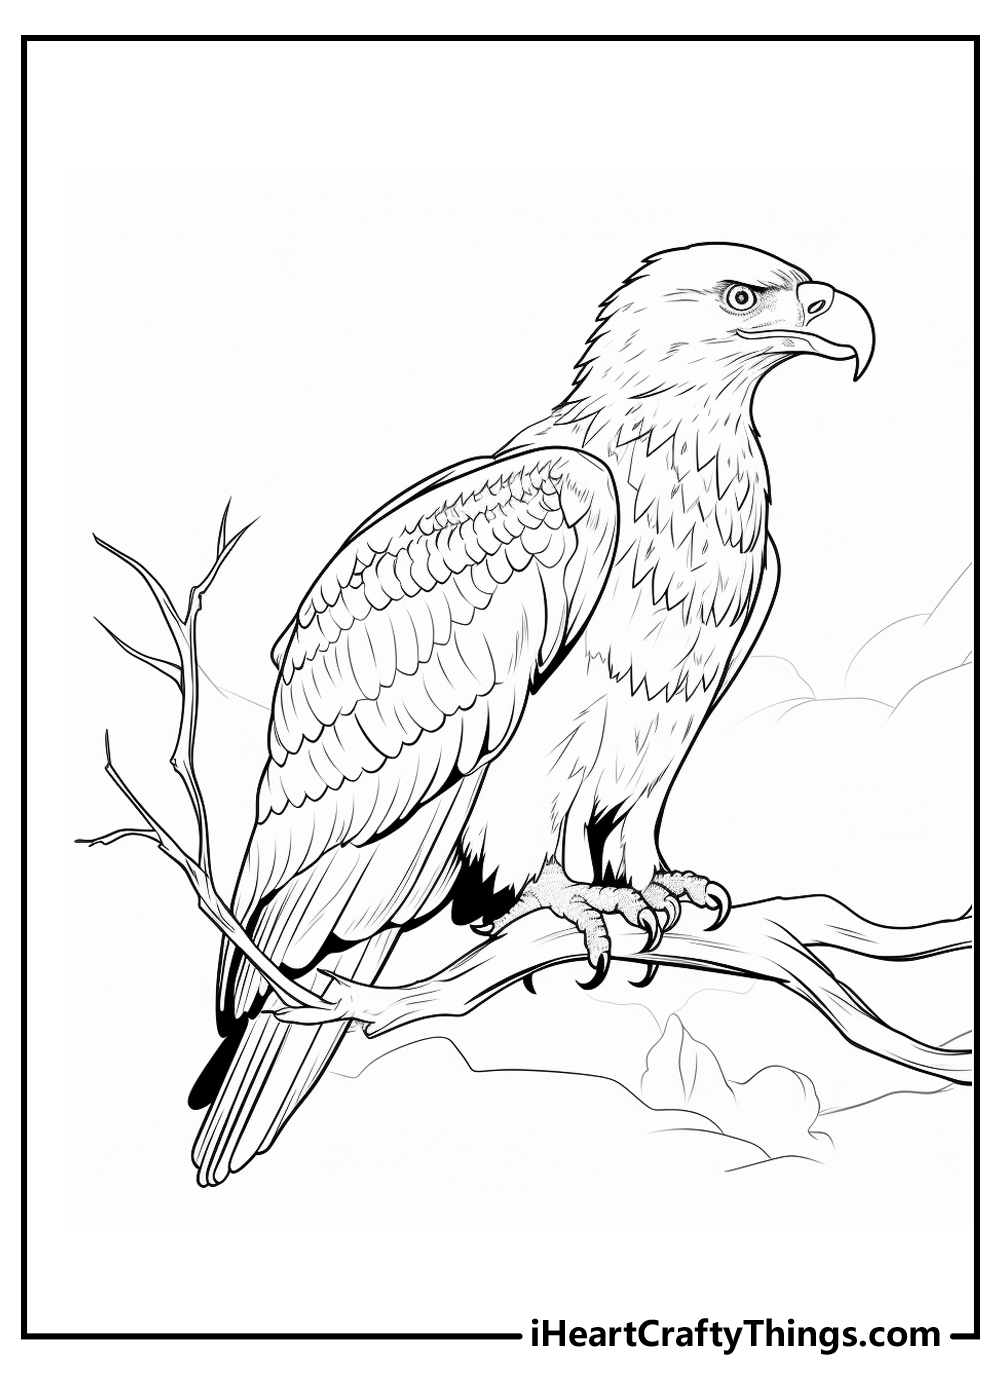 Bald eagle coloring pages updated